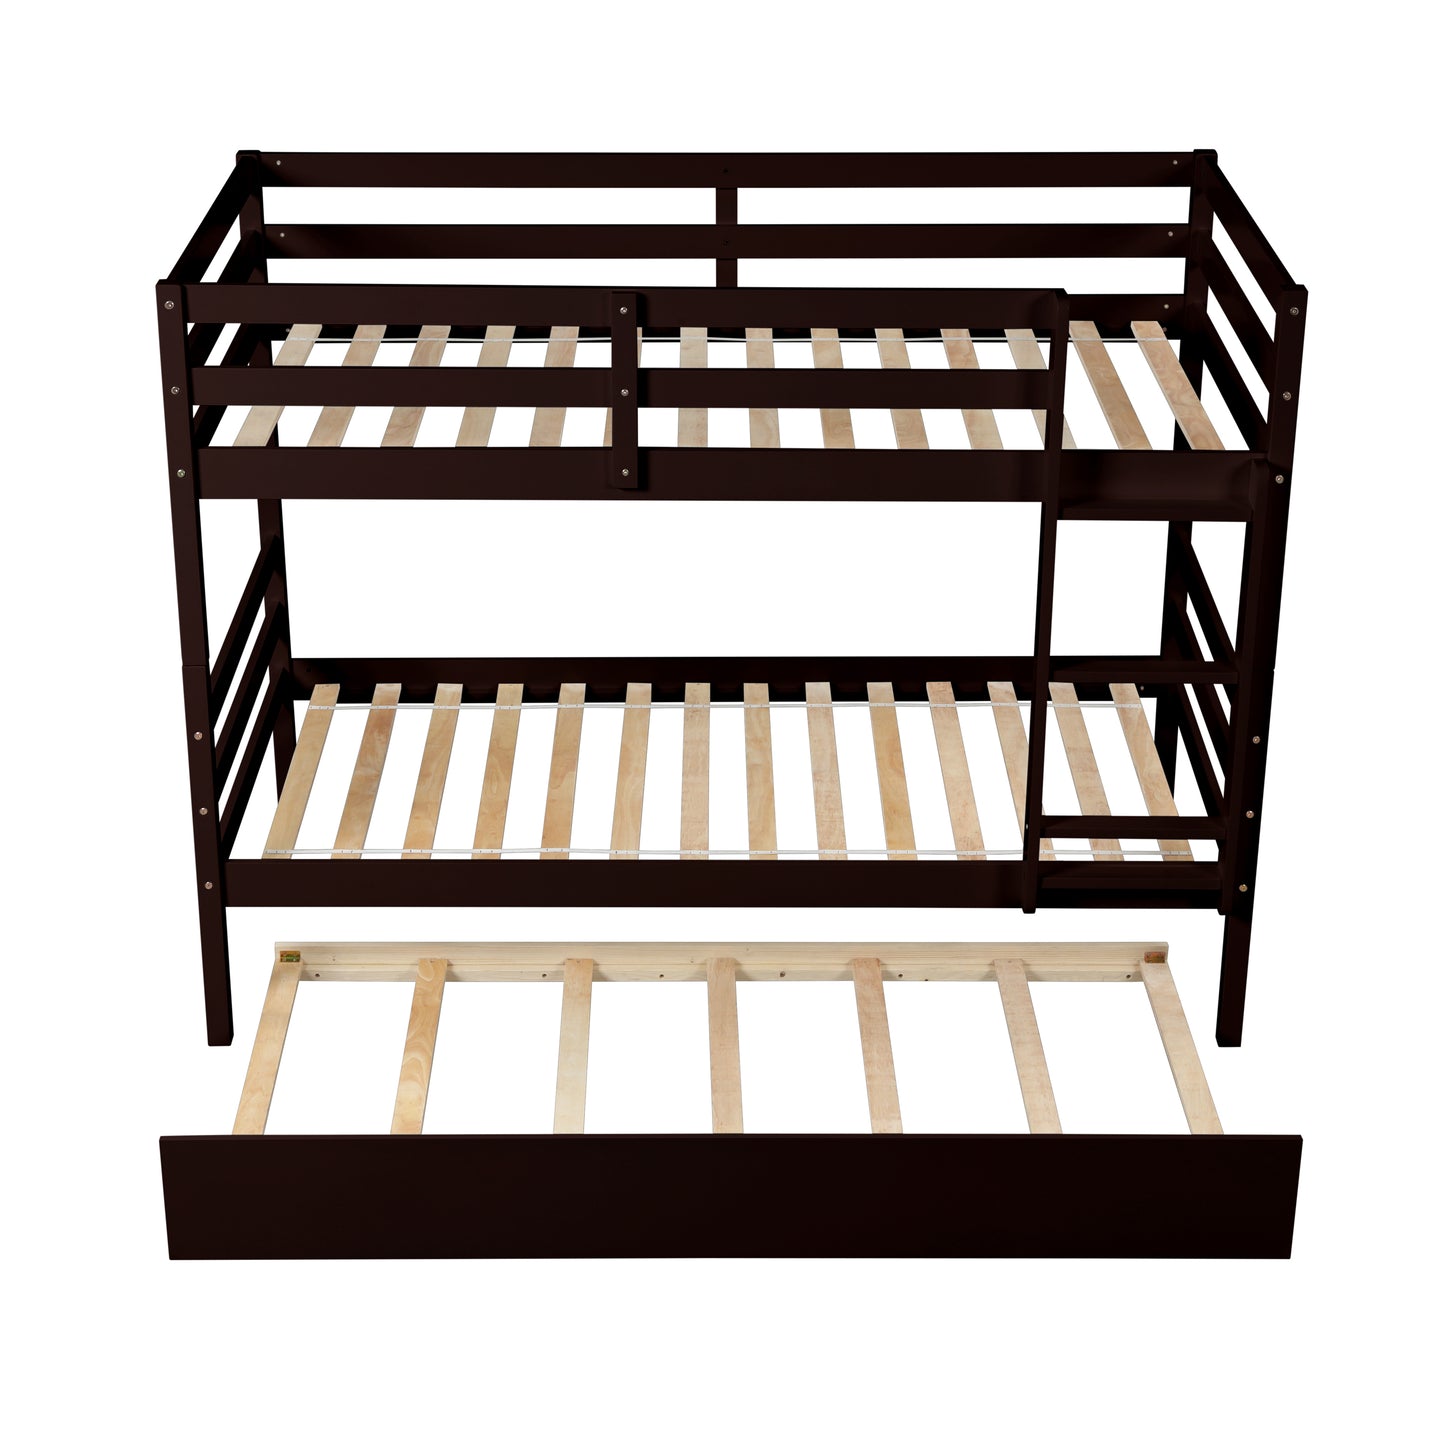 TWIN BUNKBED WITH TWIN TRUNDLE